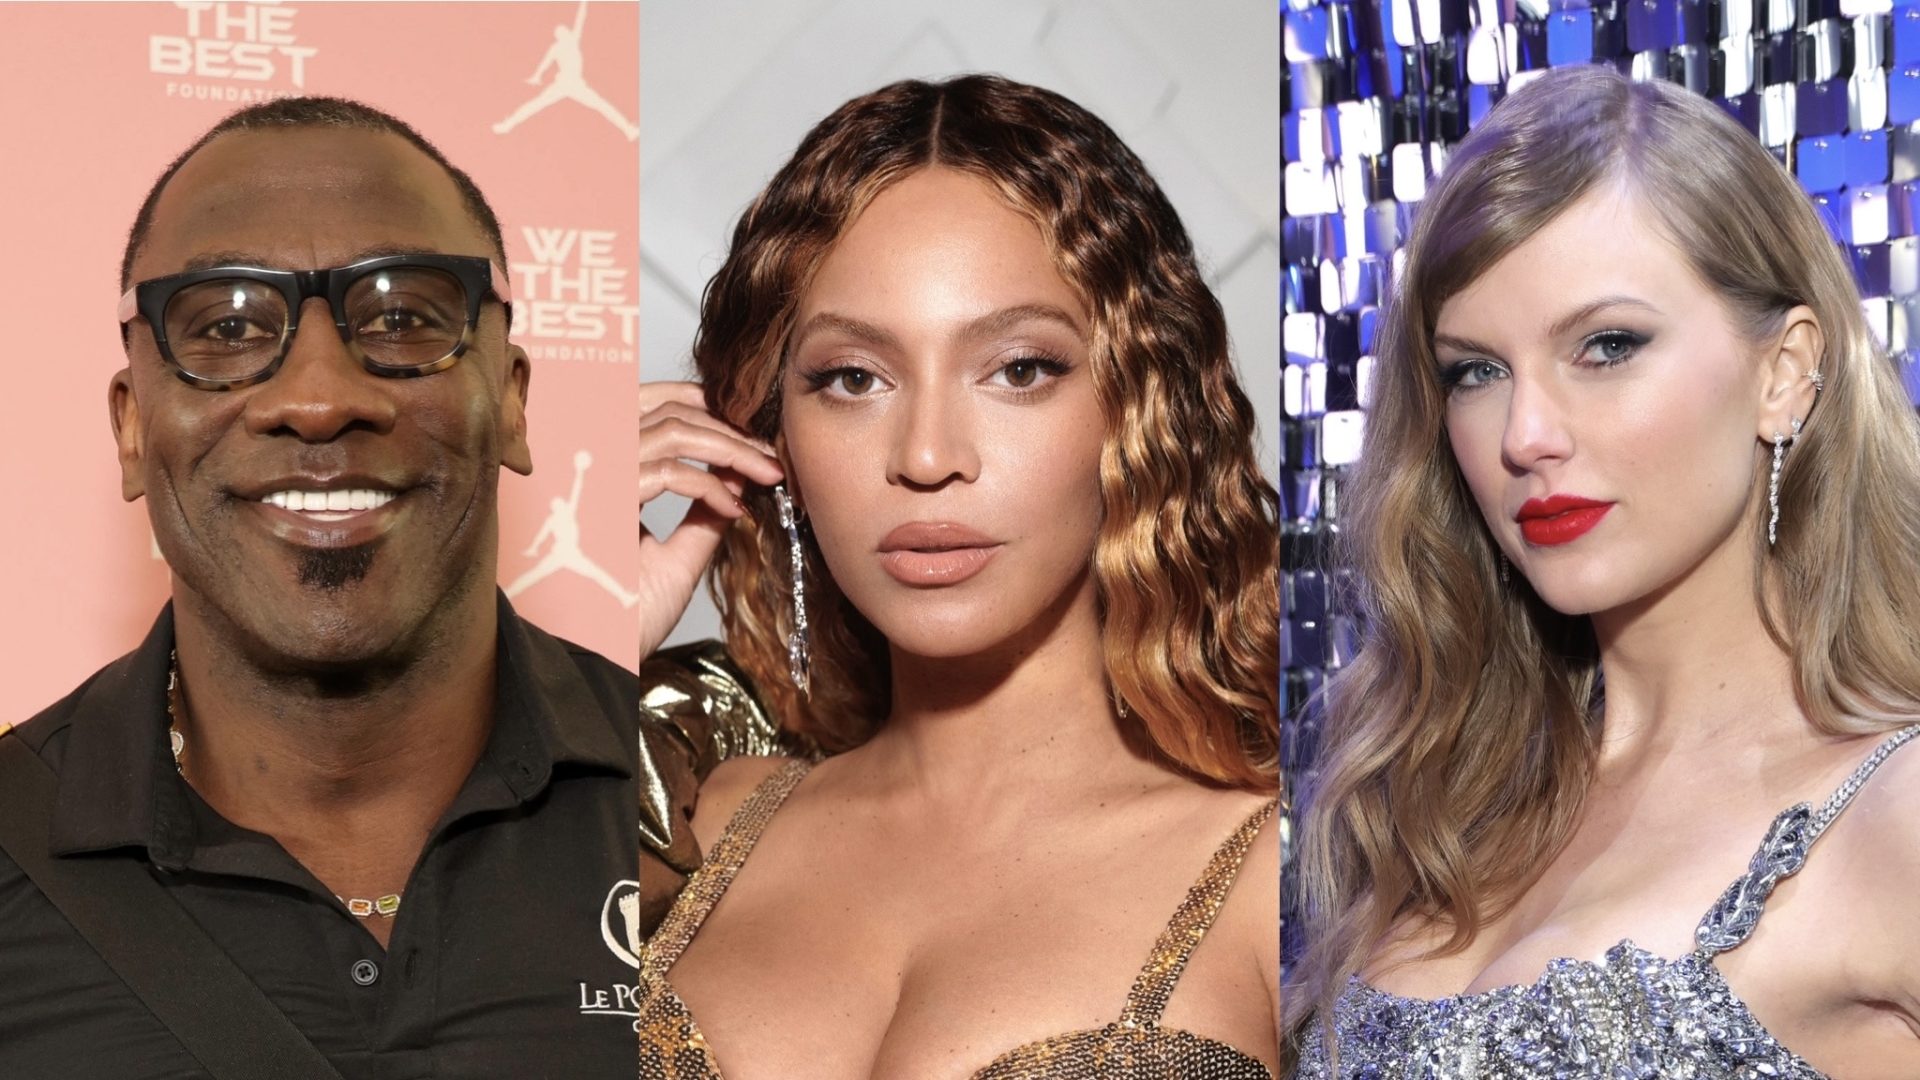 Oop Social Media Weighs In After Shannon Sharpe Compares Beyonce To Taylor Swift Video Scaled.jpg